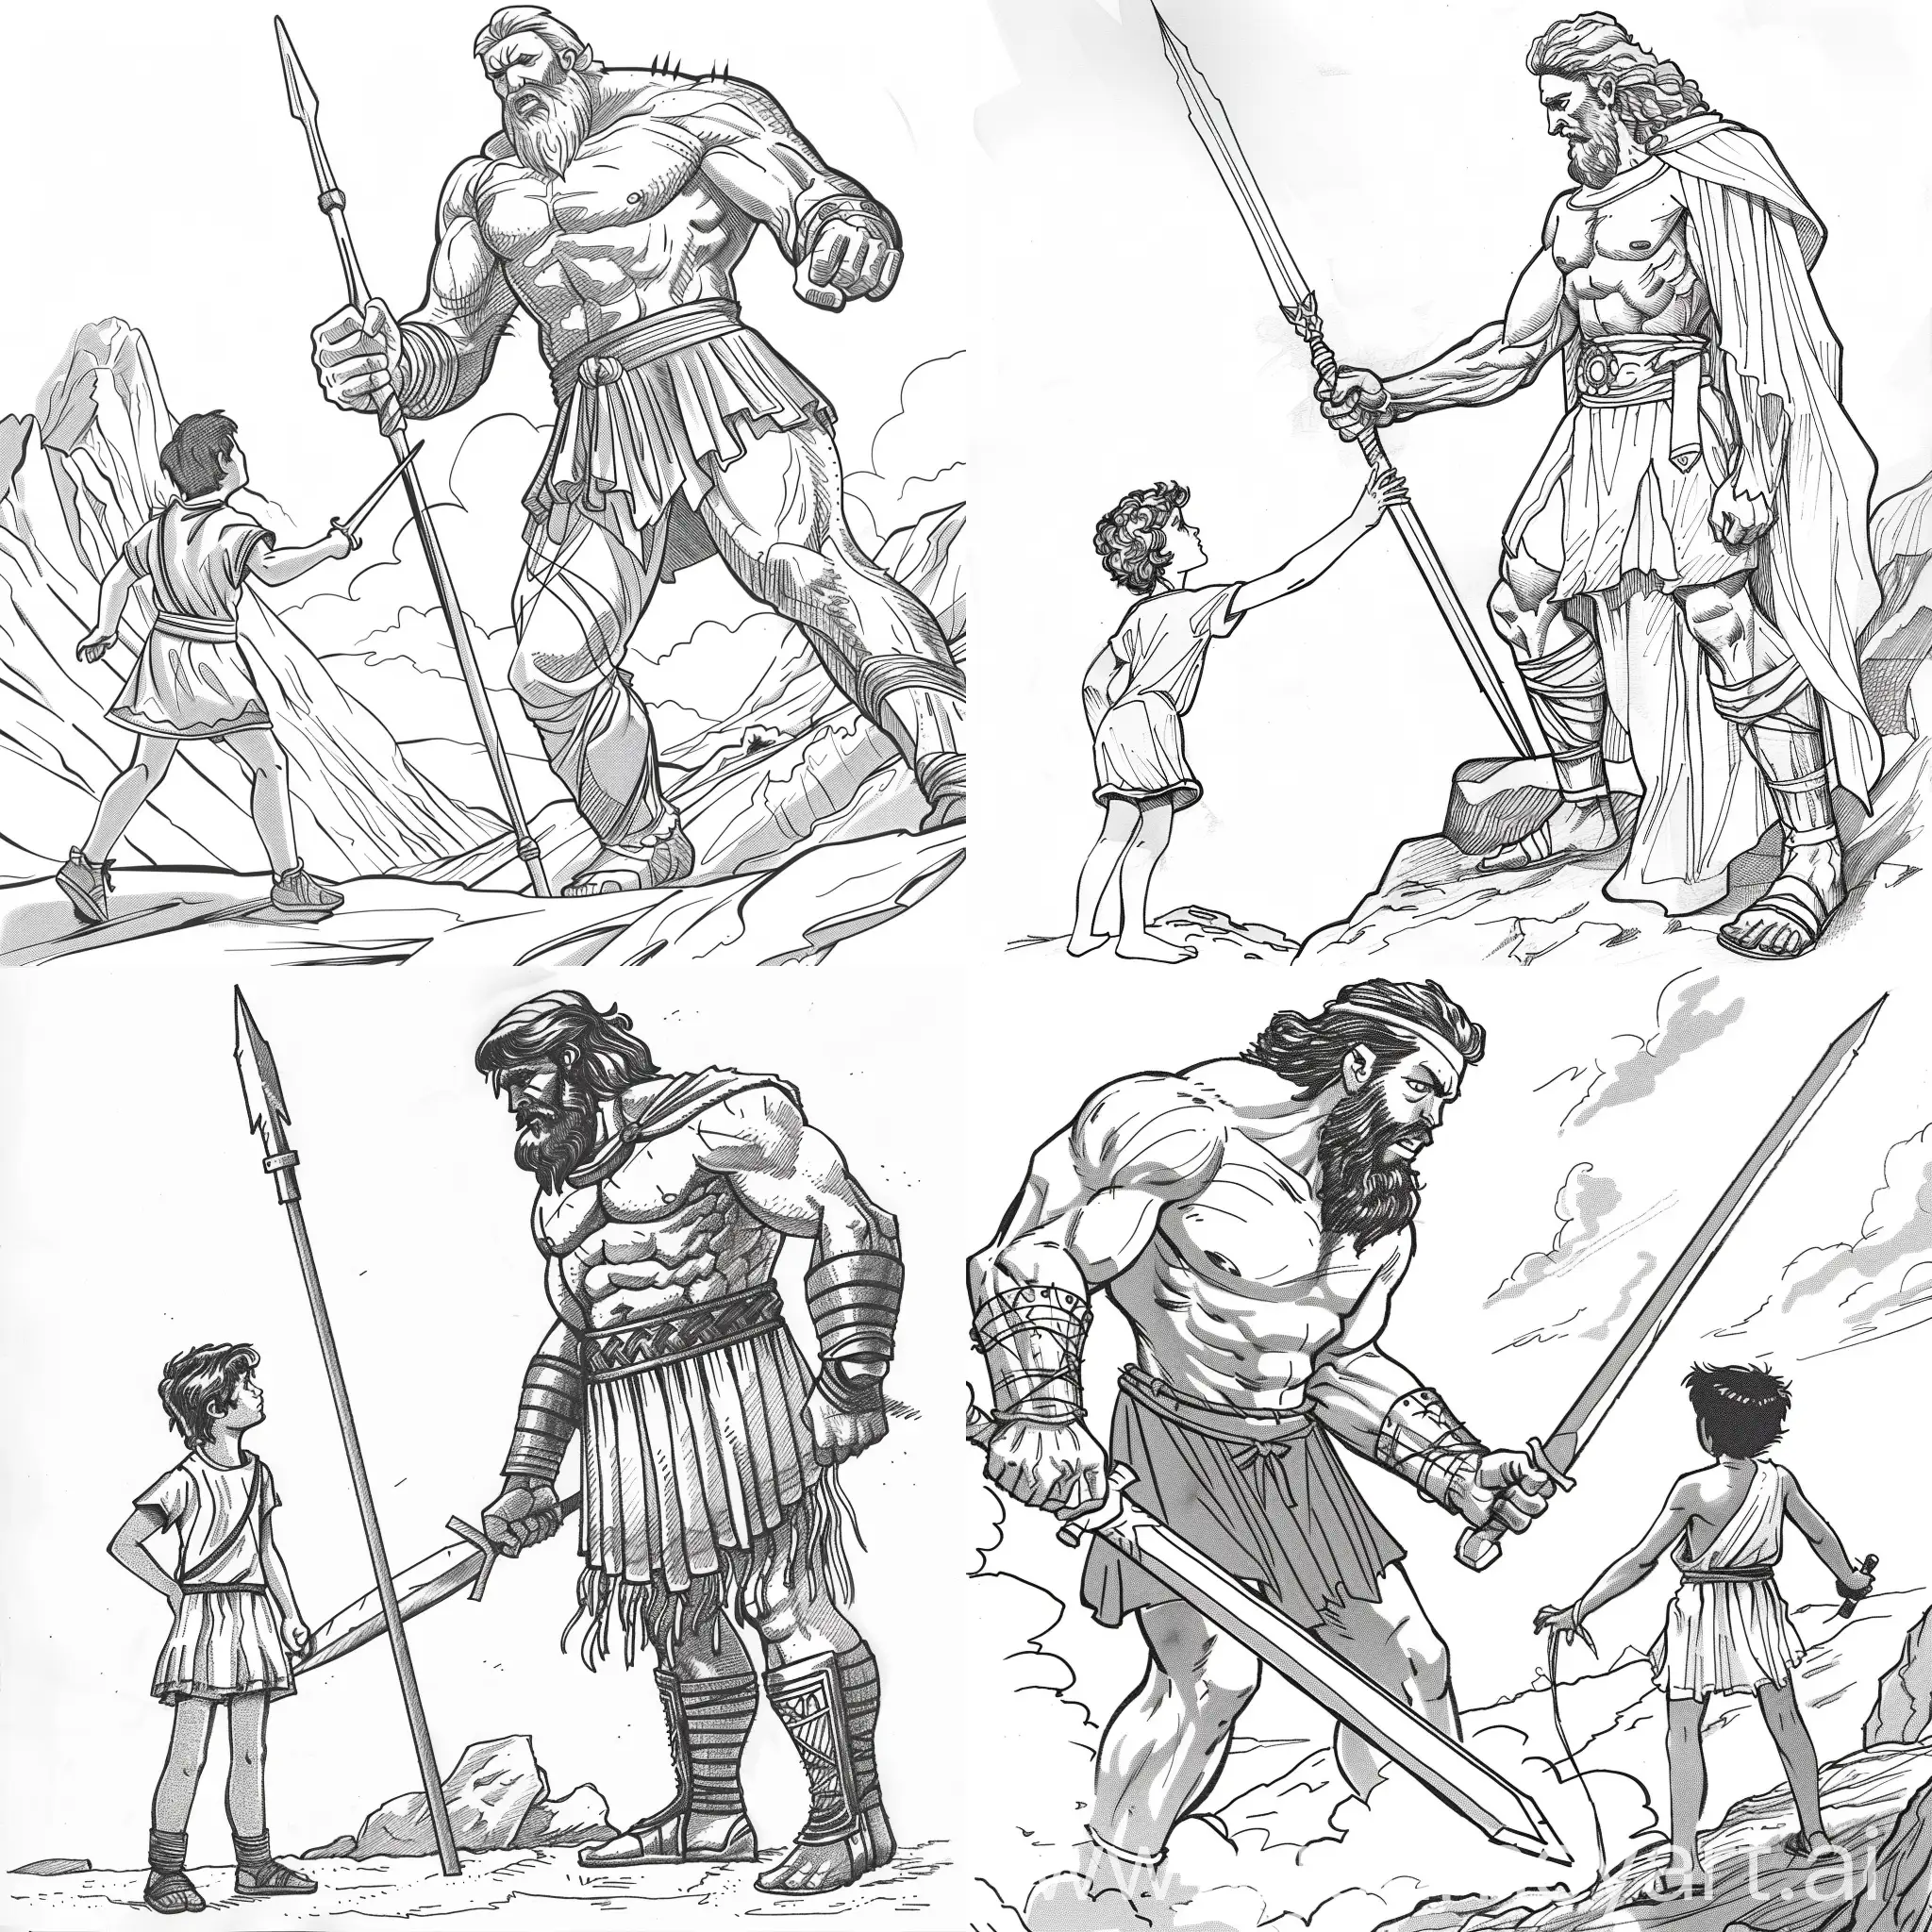 Create an outline drawing (only lines, no color, with a white background) for my Bible-themed coloring and storybook. The drawing should feature only the characters and no objects or colors. It should be in a realistic cartoon style. Draw David and Goliath following these specifications